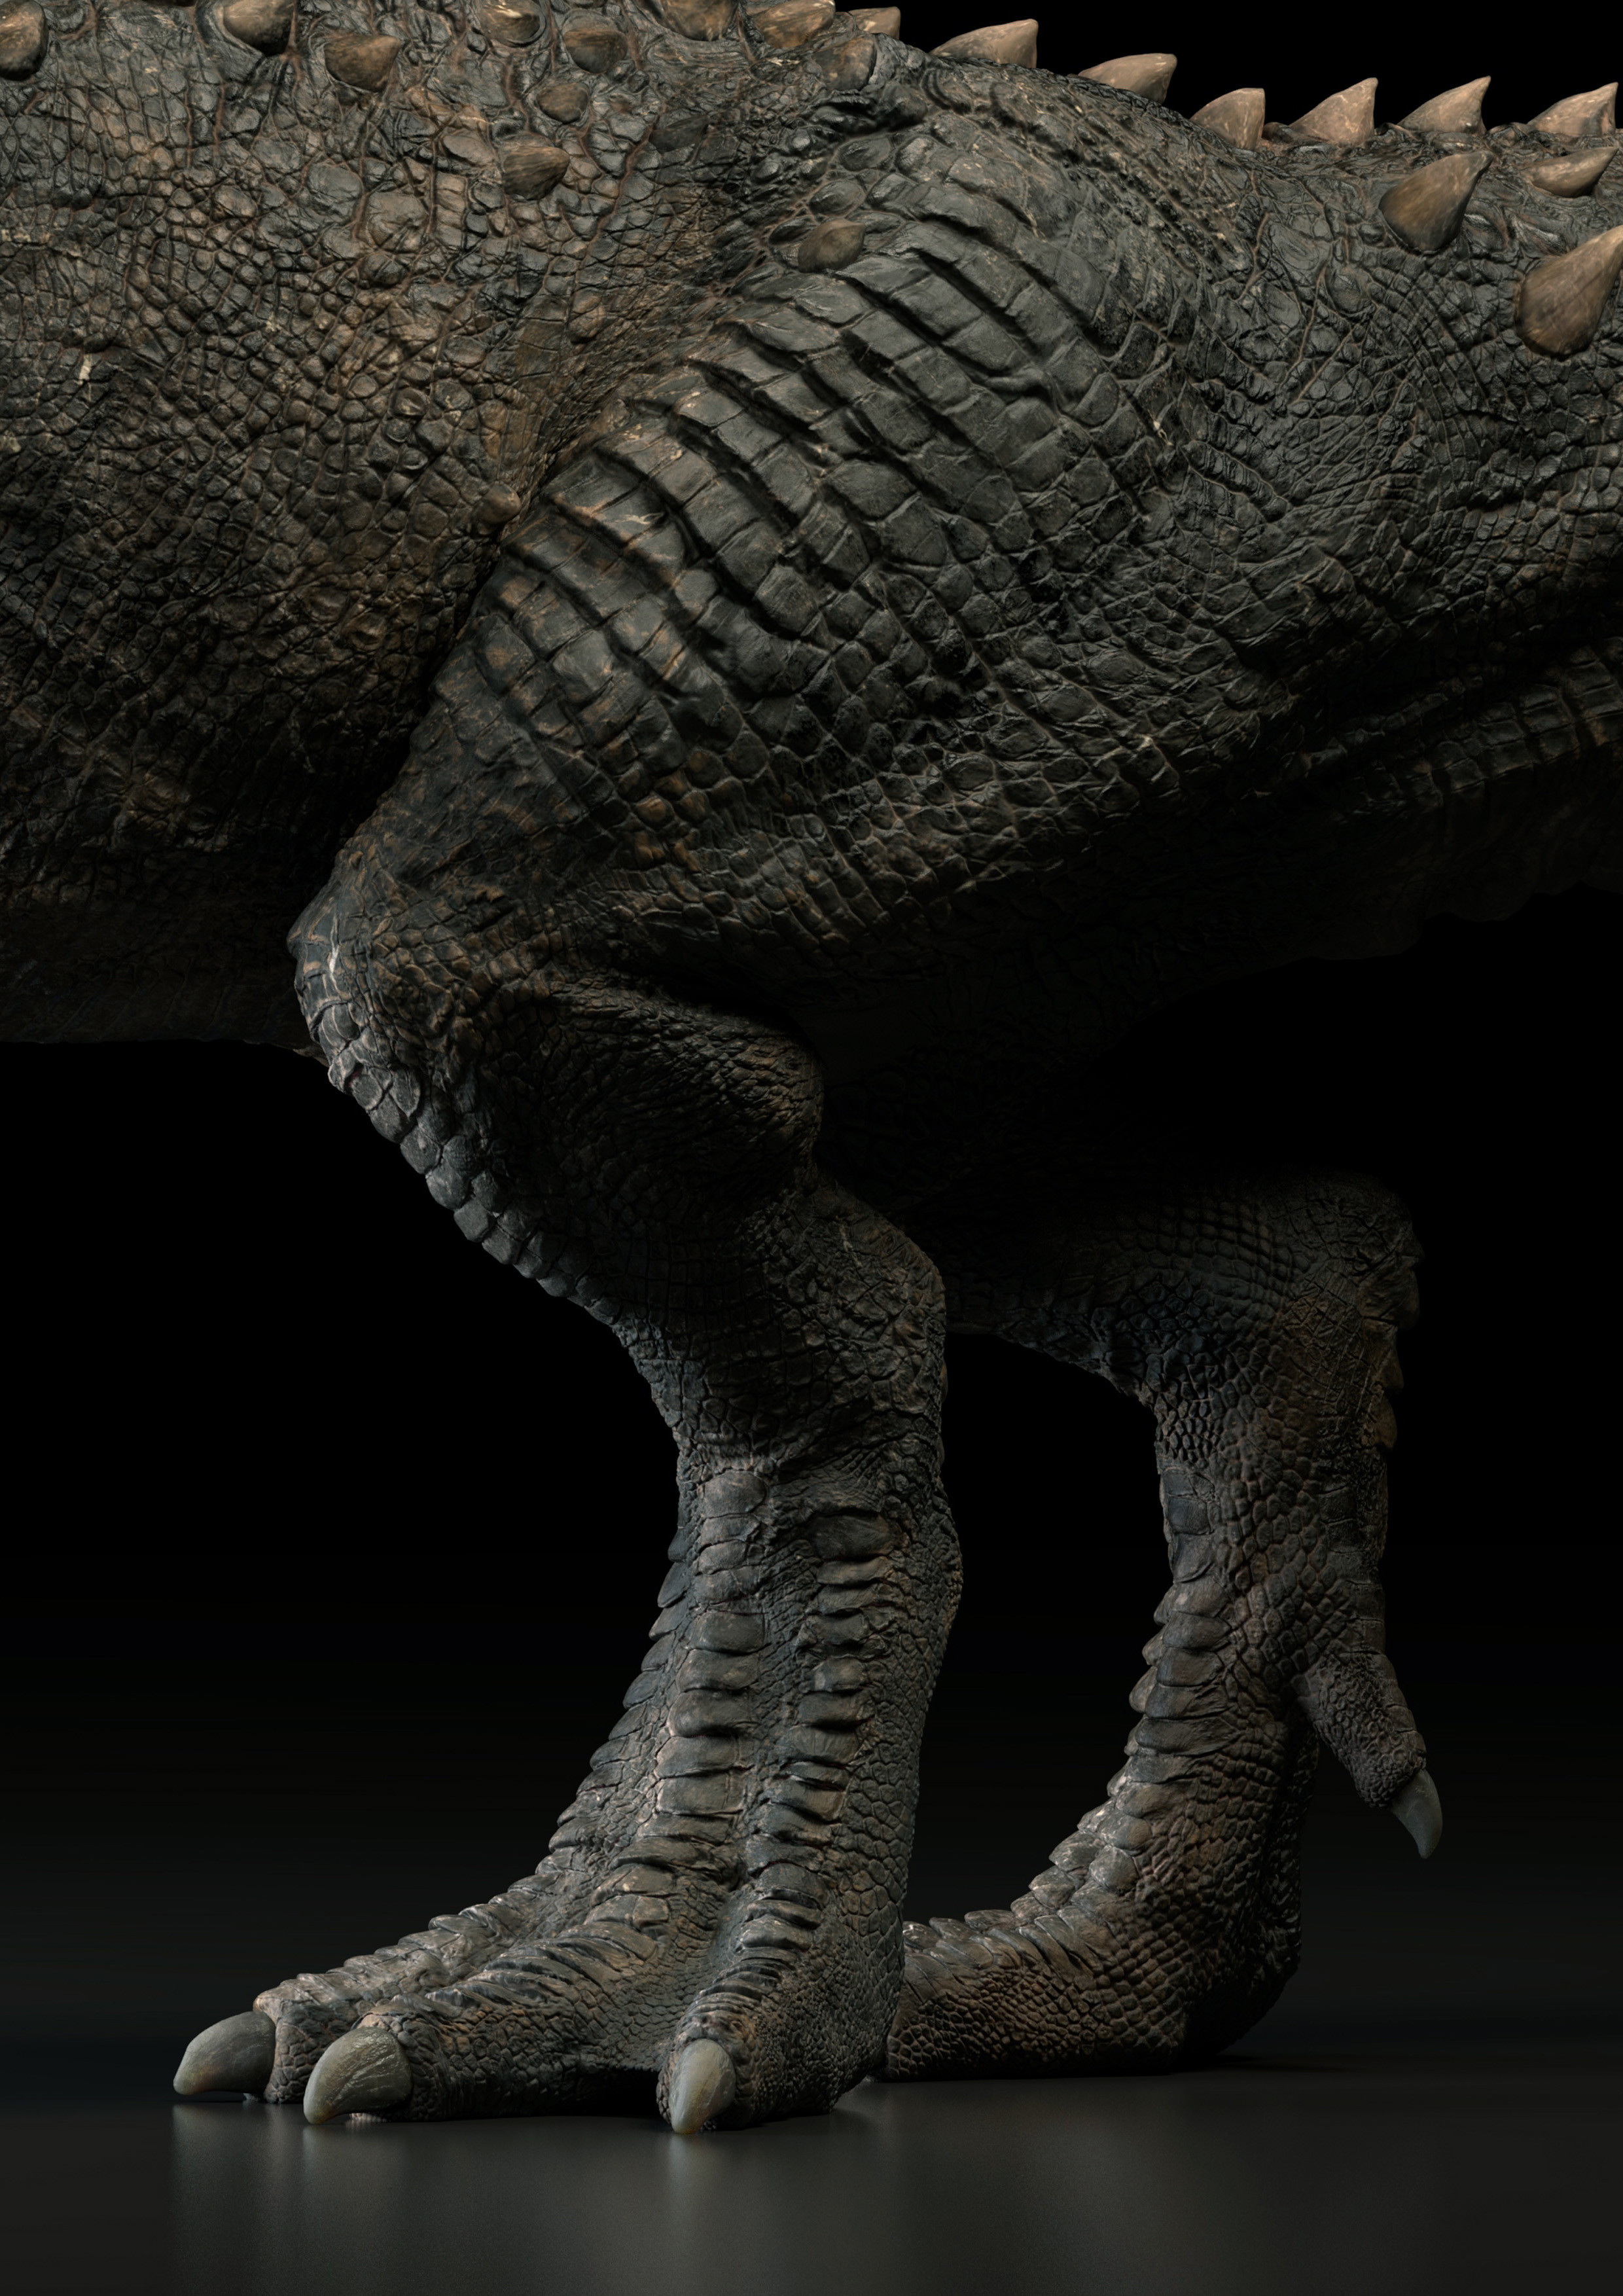 Link to the full tutorial : https://texturing.xyz/pages/gael-kerchenbaum-making-of-release-the-beast